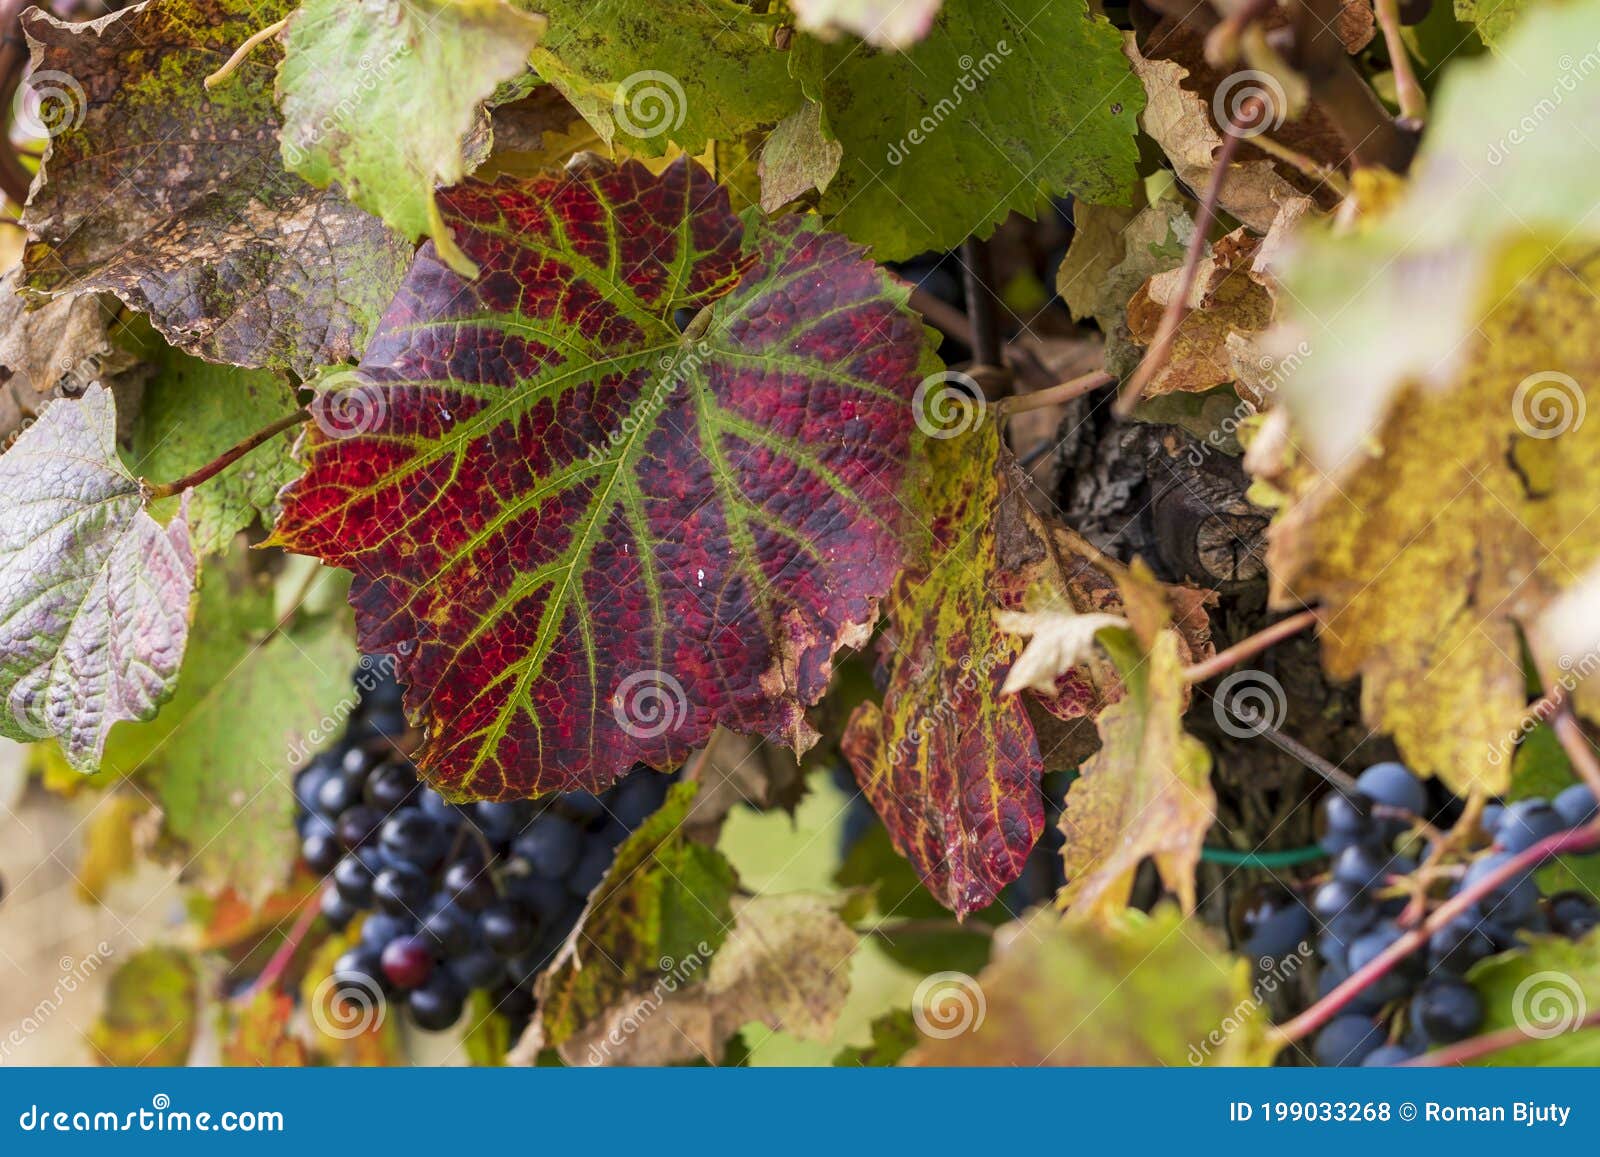 colorful leaf in the vineyard. in the background are grapes of wine